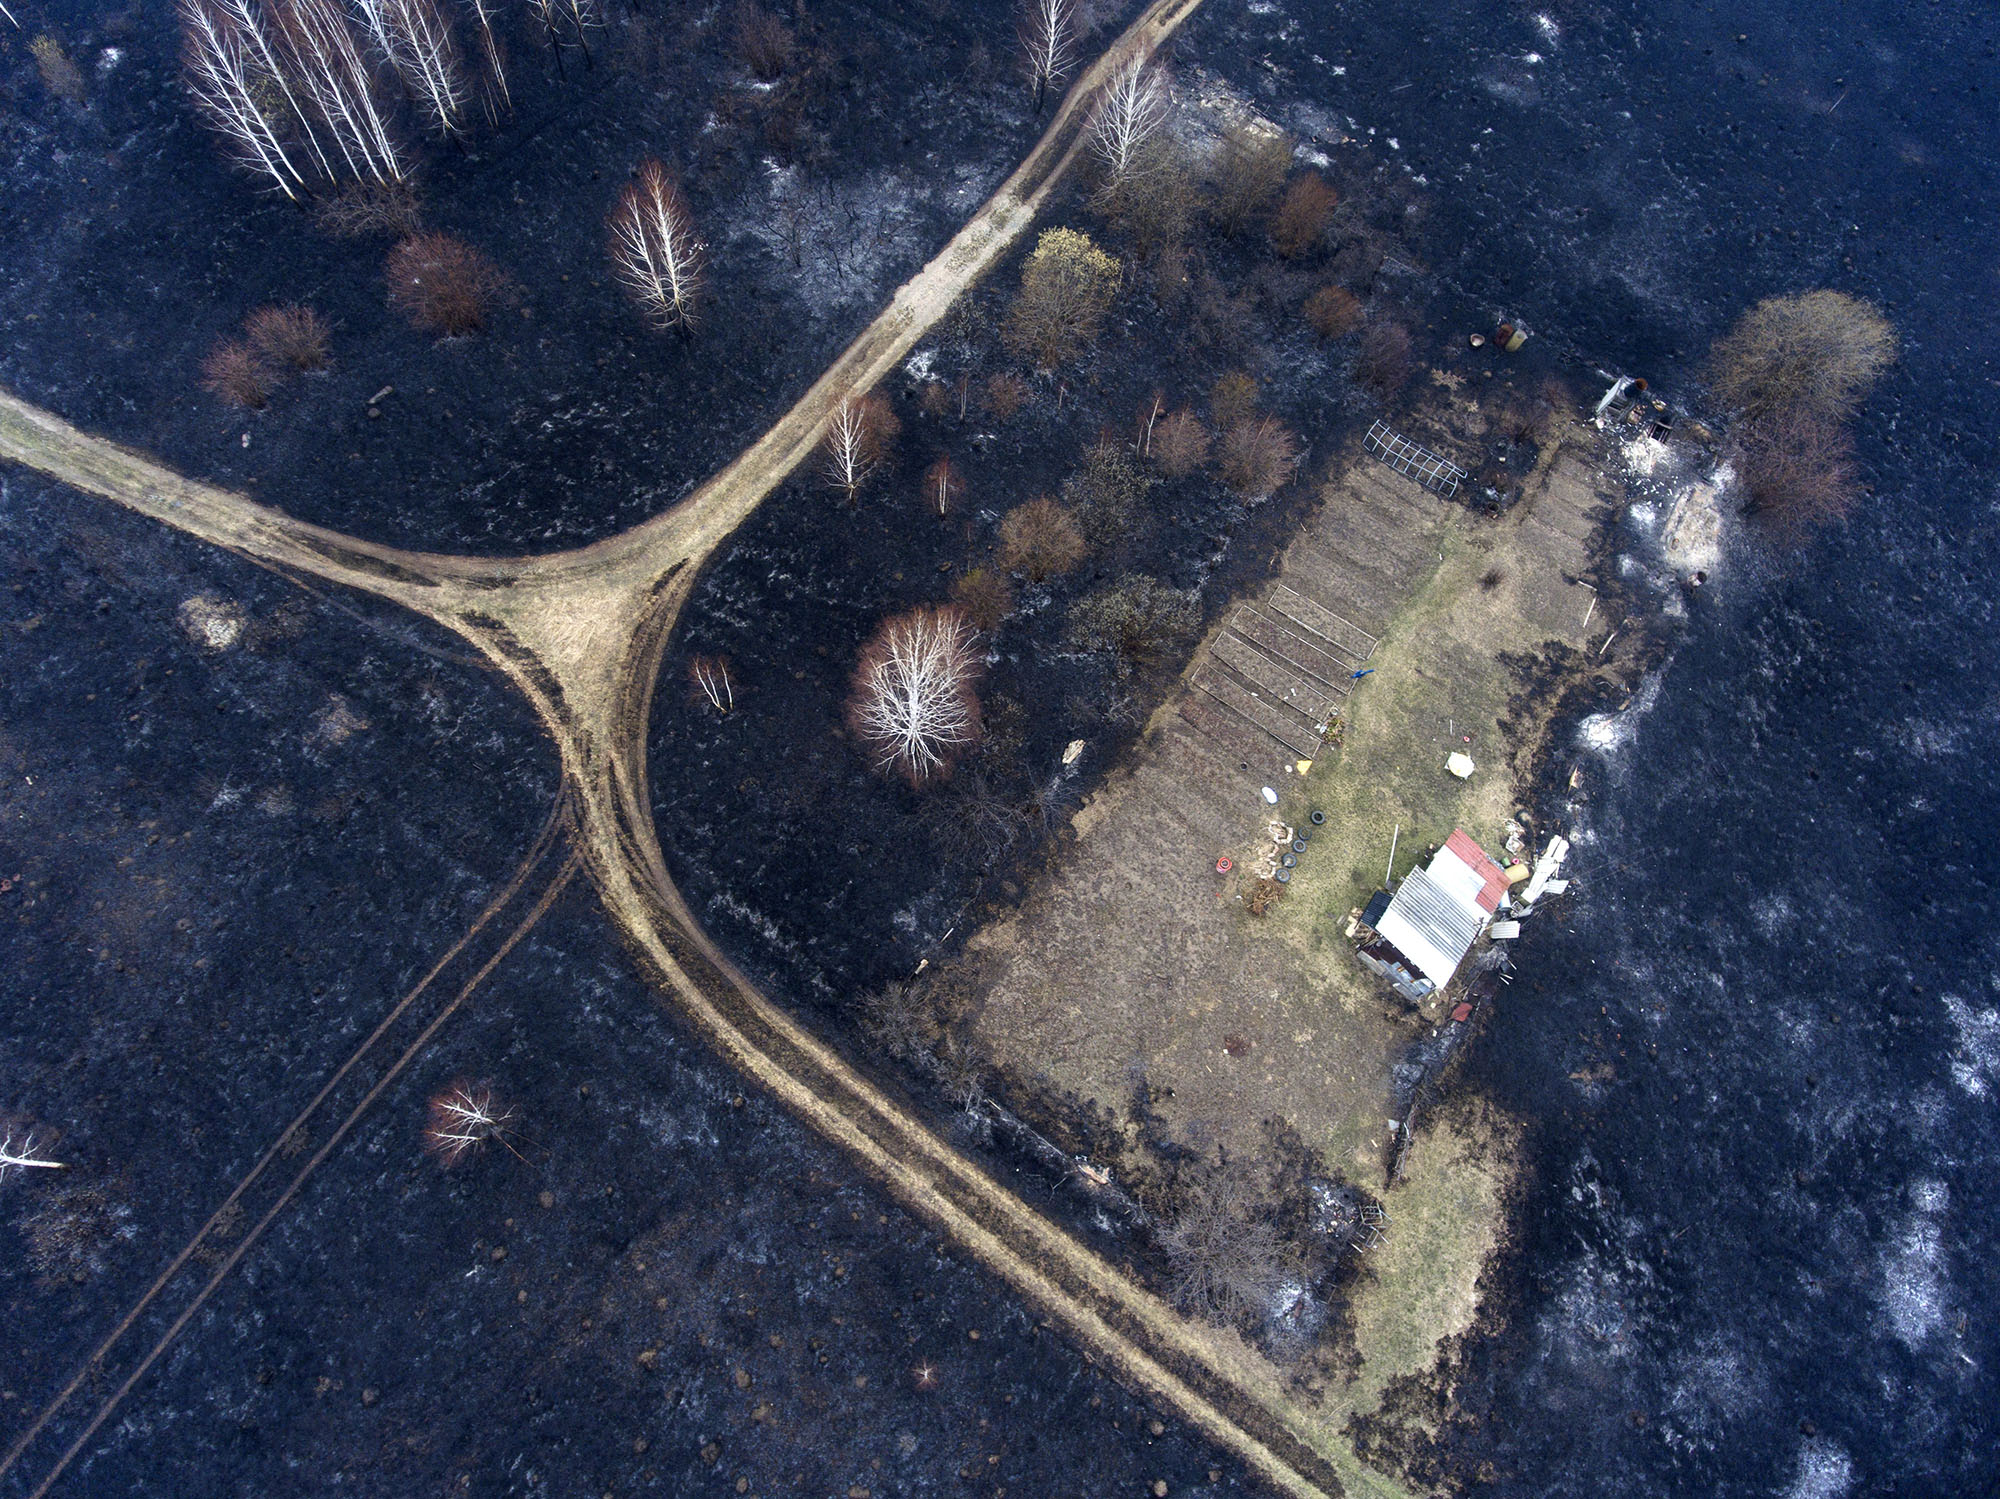 Damage&nbsp;after a fire in the Moshkovo District, Novosibirsk Region, south Siberia on April 23.&nbsp;&nbsp;